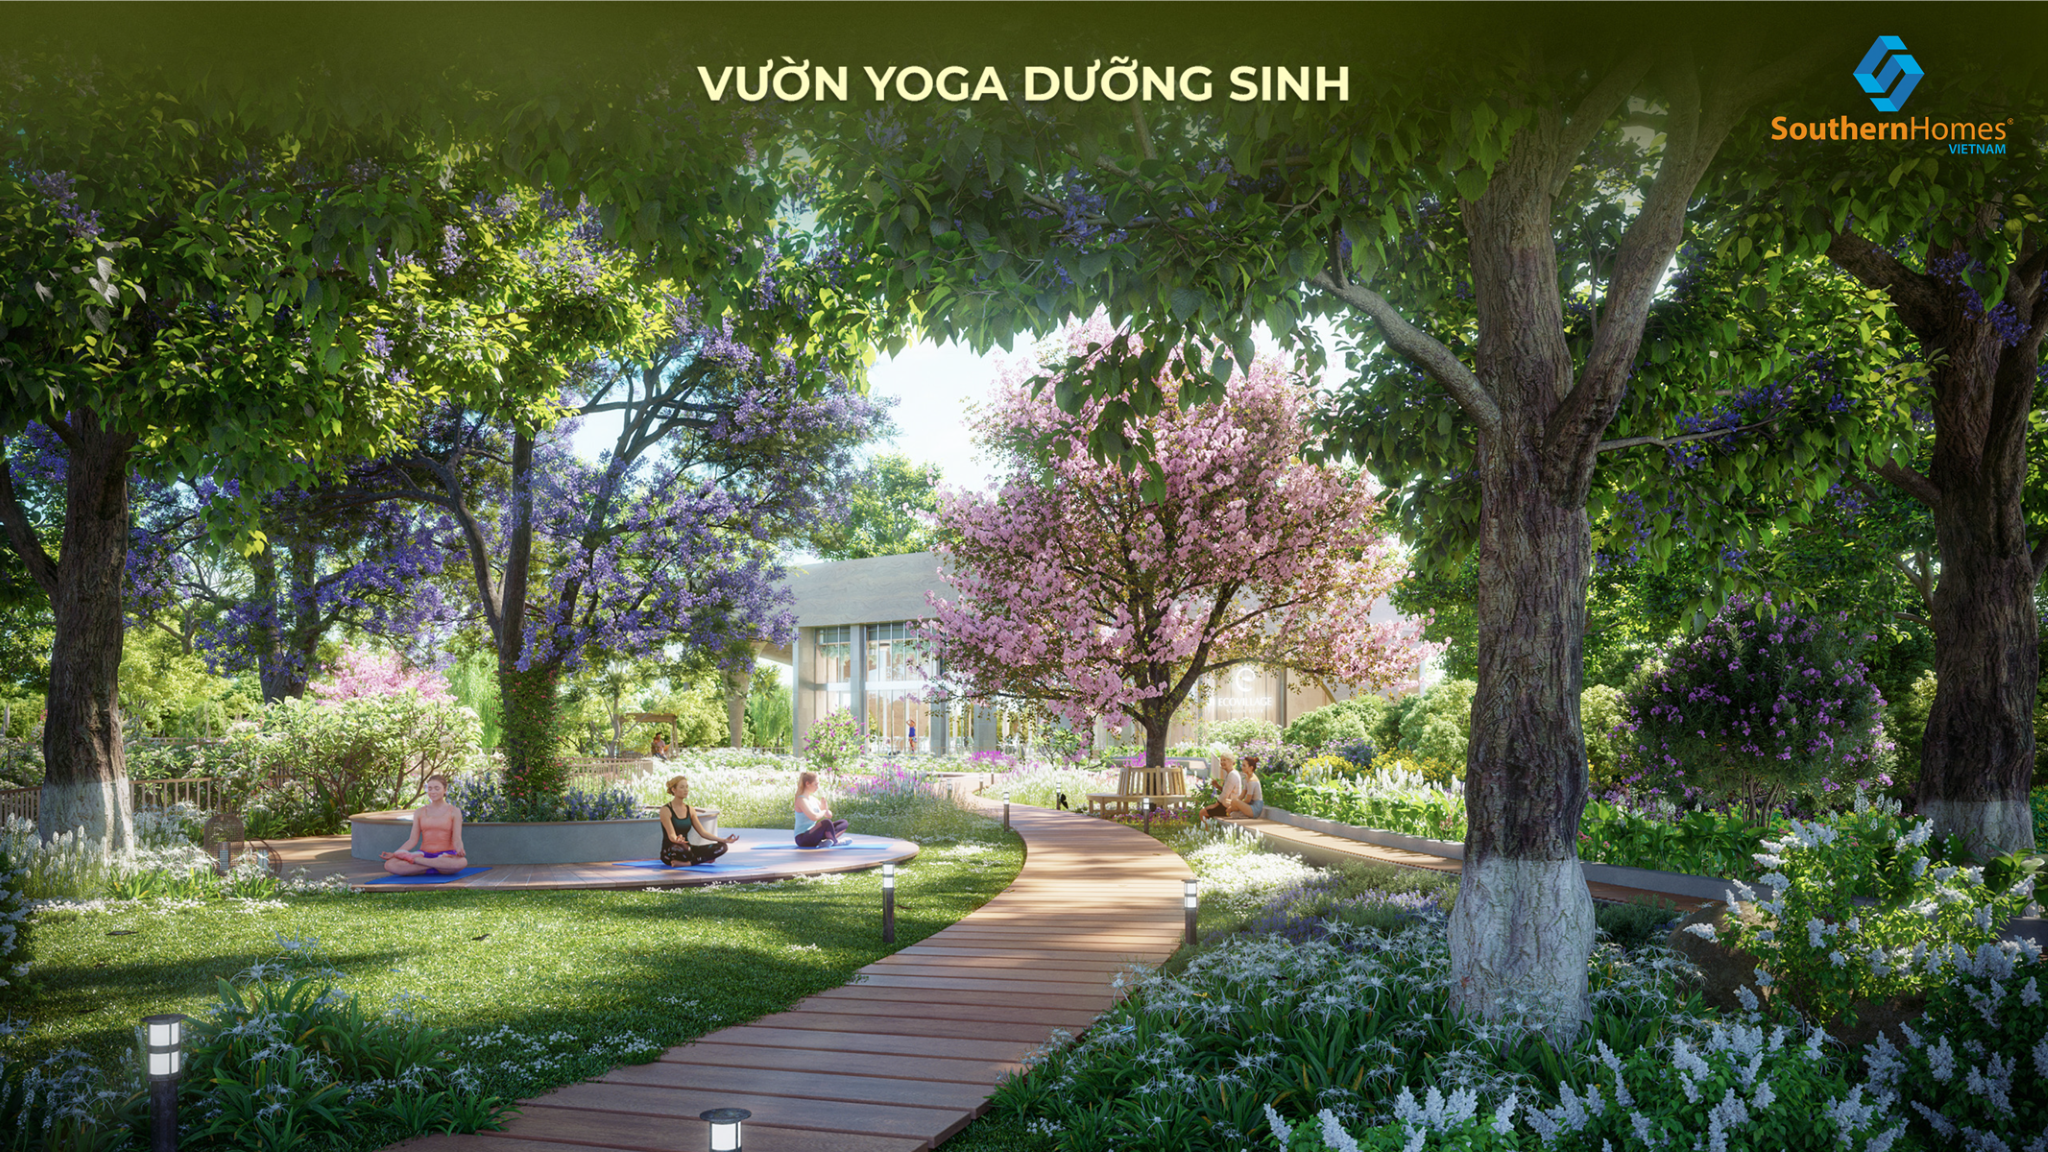 phoi-canh-du-a n-ecovillage-s ai-gon-rive10. png